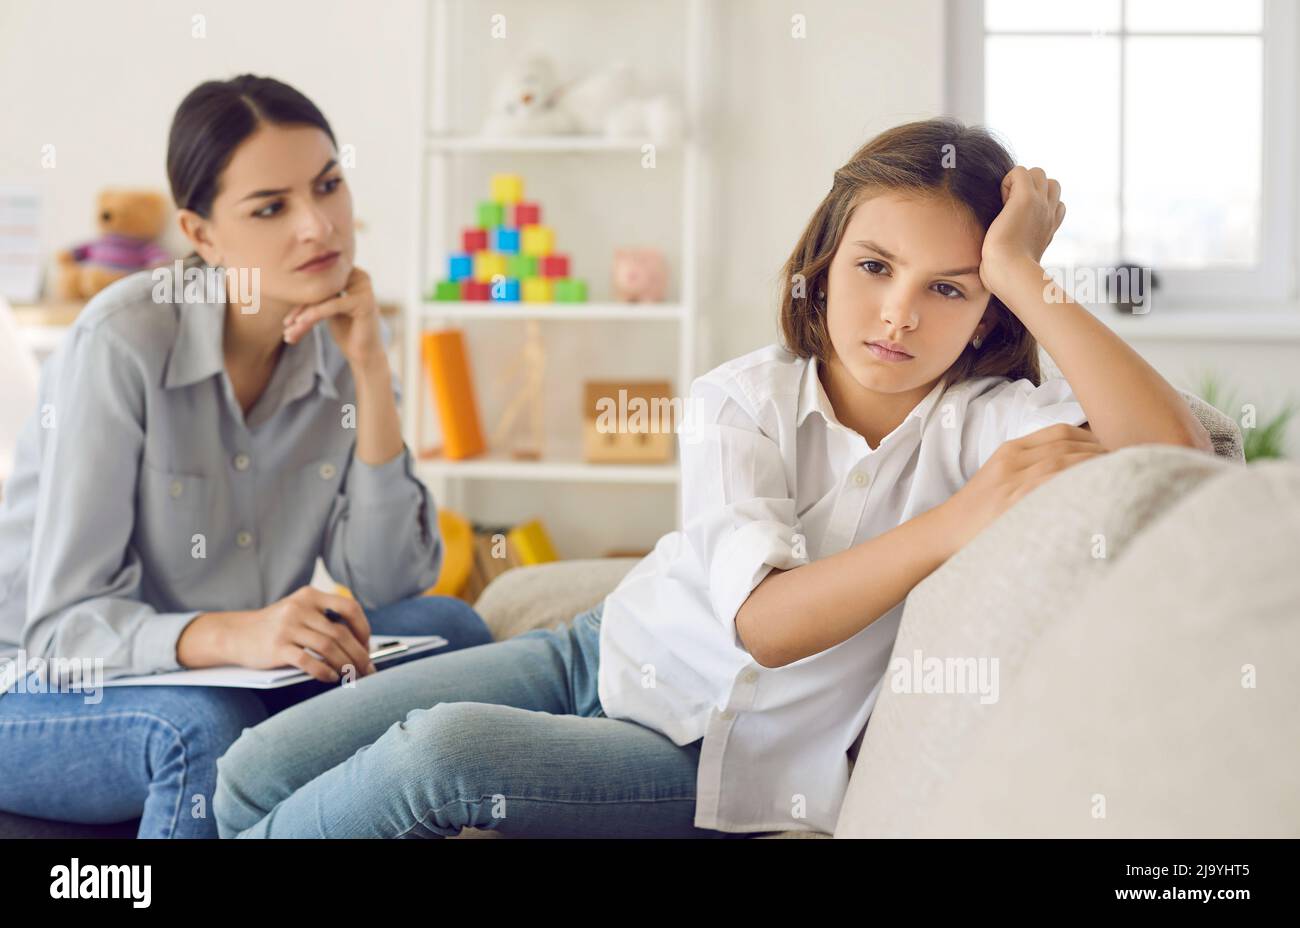 Unhappy child at psychologist's office not ready to talk about problems and emotions Stock Photo